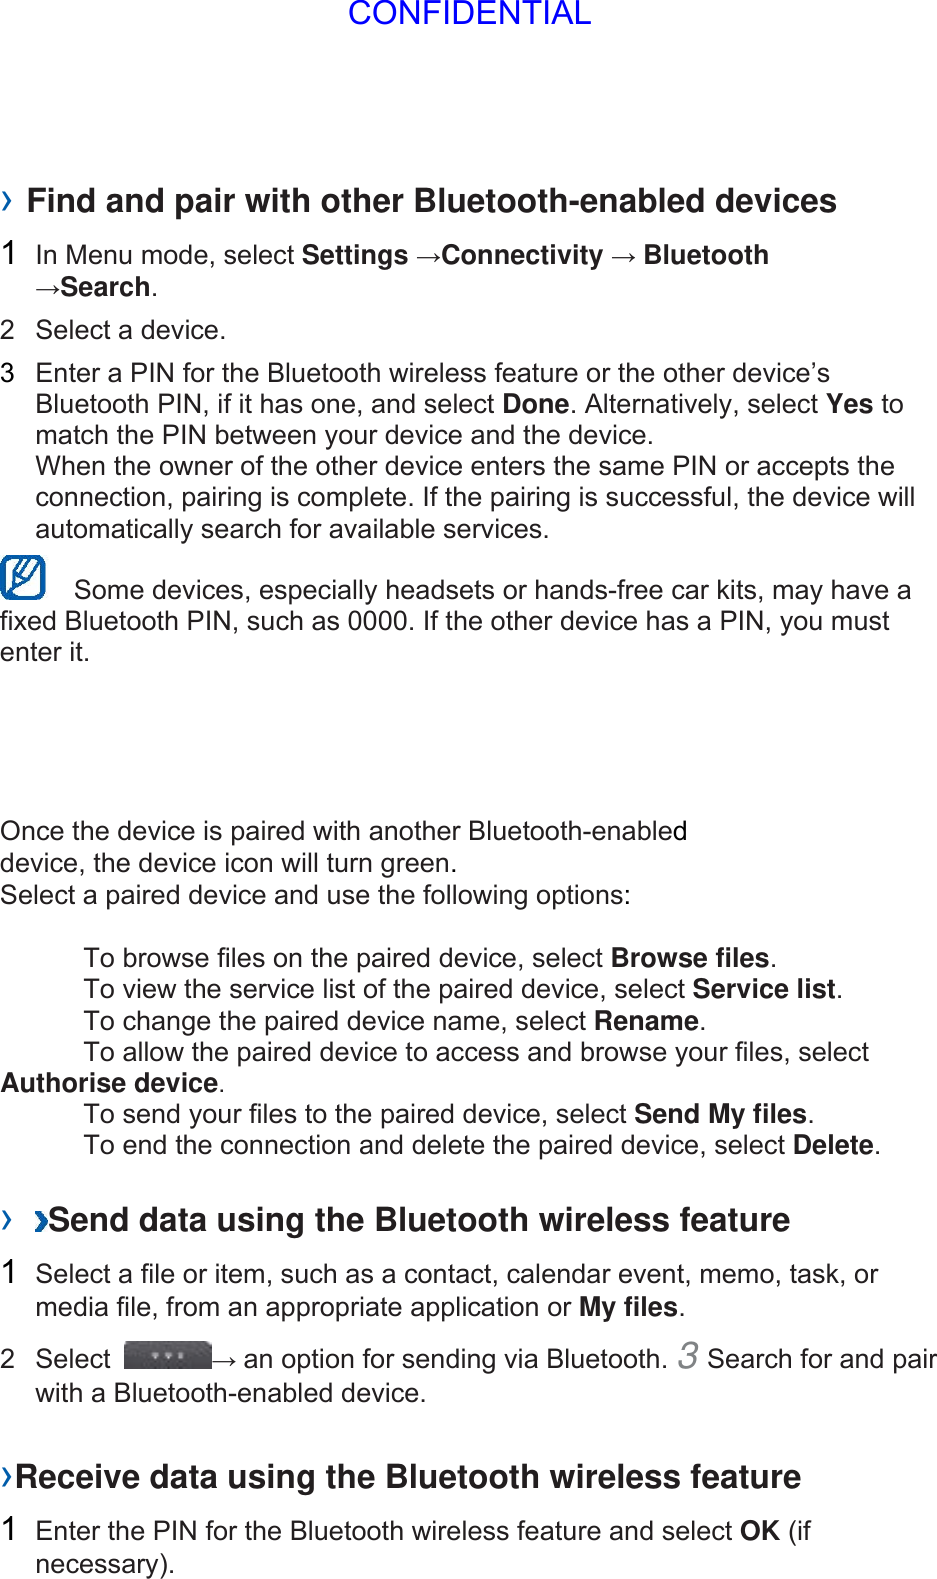 › Find and pair with other Bluetooth-enabled devices   1  In Menu mode, select Settings →Connectivity → Bluetooth →Search.  2  Select a device.   3  Enter a PIN for the Bluetooth wireless feature or the other device’s Bluetooth PIN, if it has one, and select Done. Alternatively, select Yes to match the PIN between your device and the device.   When the owner of the other device enters the same PIN or accepts the connection, pairing is complete. If the pairing is successful, the device will automatically search for available services.     Some devices, especially headsets or hands-free car kits, may have a fixed Bluetooth PIN, such as 0000. If the other device has a PIN, you must enter it.   Once the device is paired with another Bluetooth-enabled device, the device icon will turn green. Select a paired device and use the following options:    To browse files on the paired device, select Browse files.    To view the service list of the paired device, select Service list.    To change the paired device name, select Rename.   To allow the paired device to access and browse your files, select Authorise device.    To send your files to the paired device, select Send My files.    To end the connection and delete the paired device, select Delete.   ›  Send data using the Bluetooth wireless feature   1  Select a file or item, such as a contact, calendar event, memo, task, or media file, from an appropriate application or My files.  2 Select  → an option for sending via Bluetooth. 3 Search for and pair with a Bluetooth-enabled device.   ›Receive data using the Bluetooth wireless feature   1  Enter the PIN for the Bluetooth wireless feature and select OK (if necessary).  CONFIDENTIAL